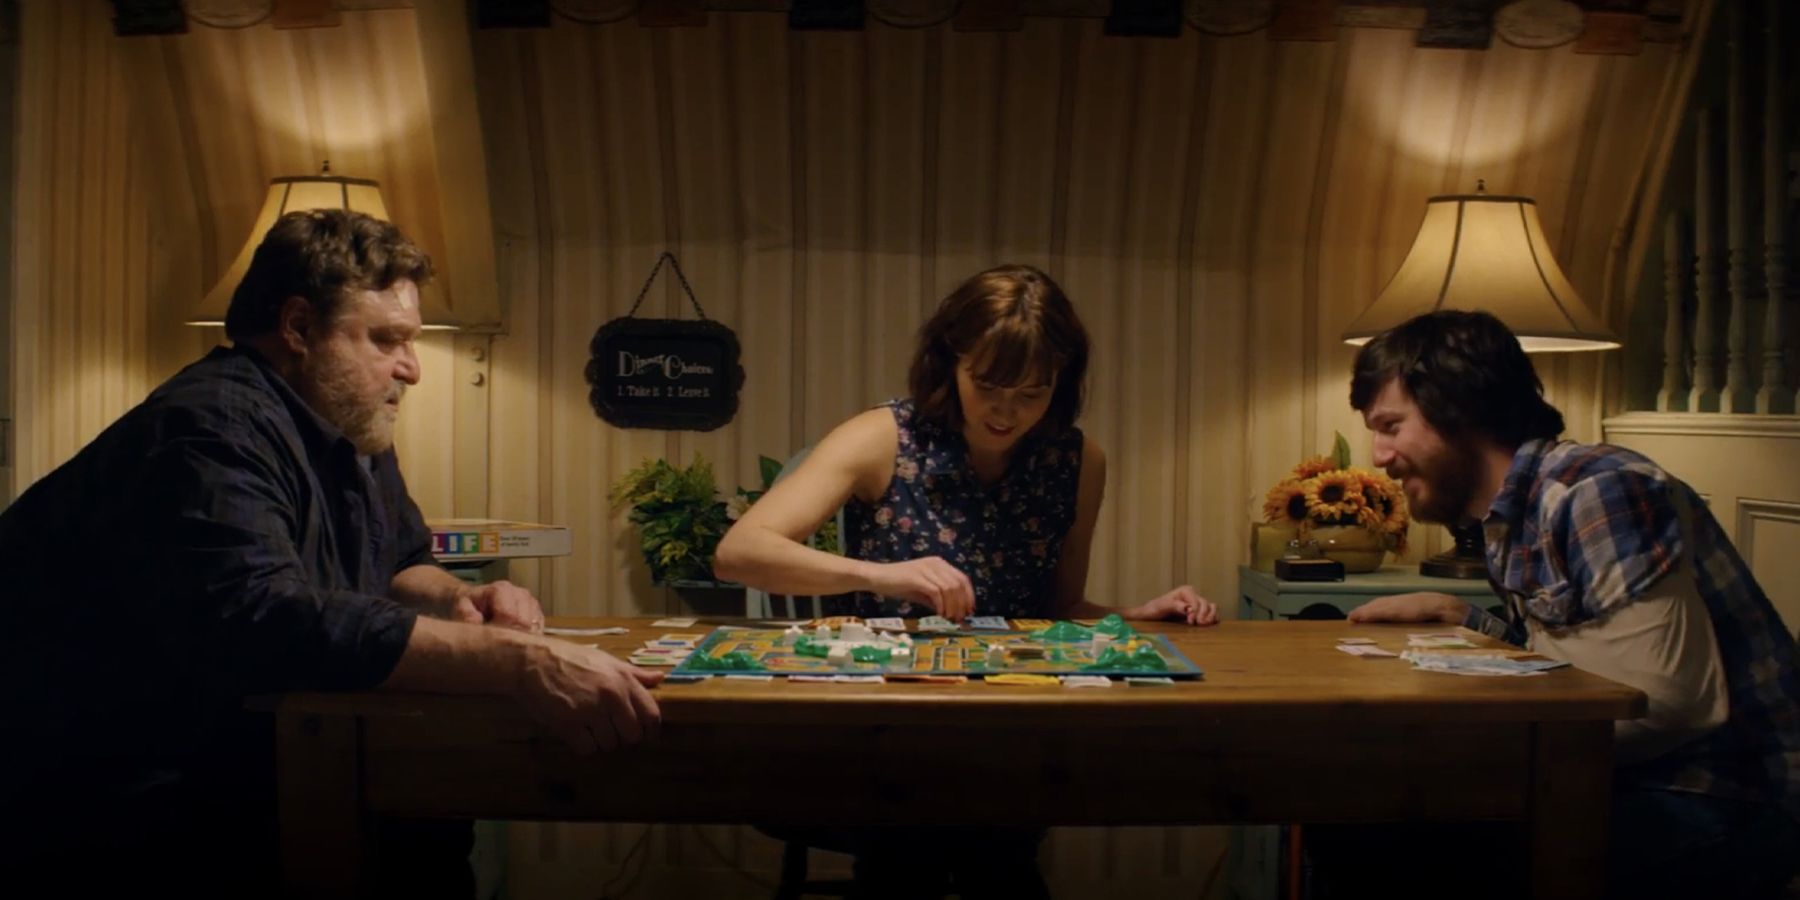 10 Cloverfield Lane characters together